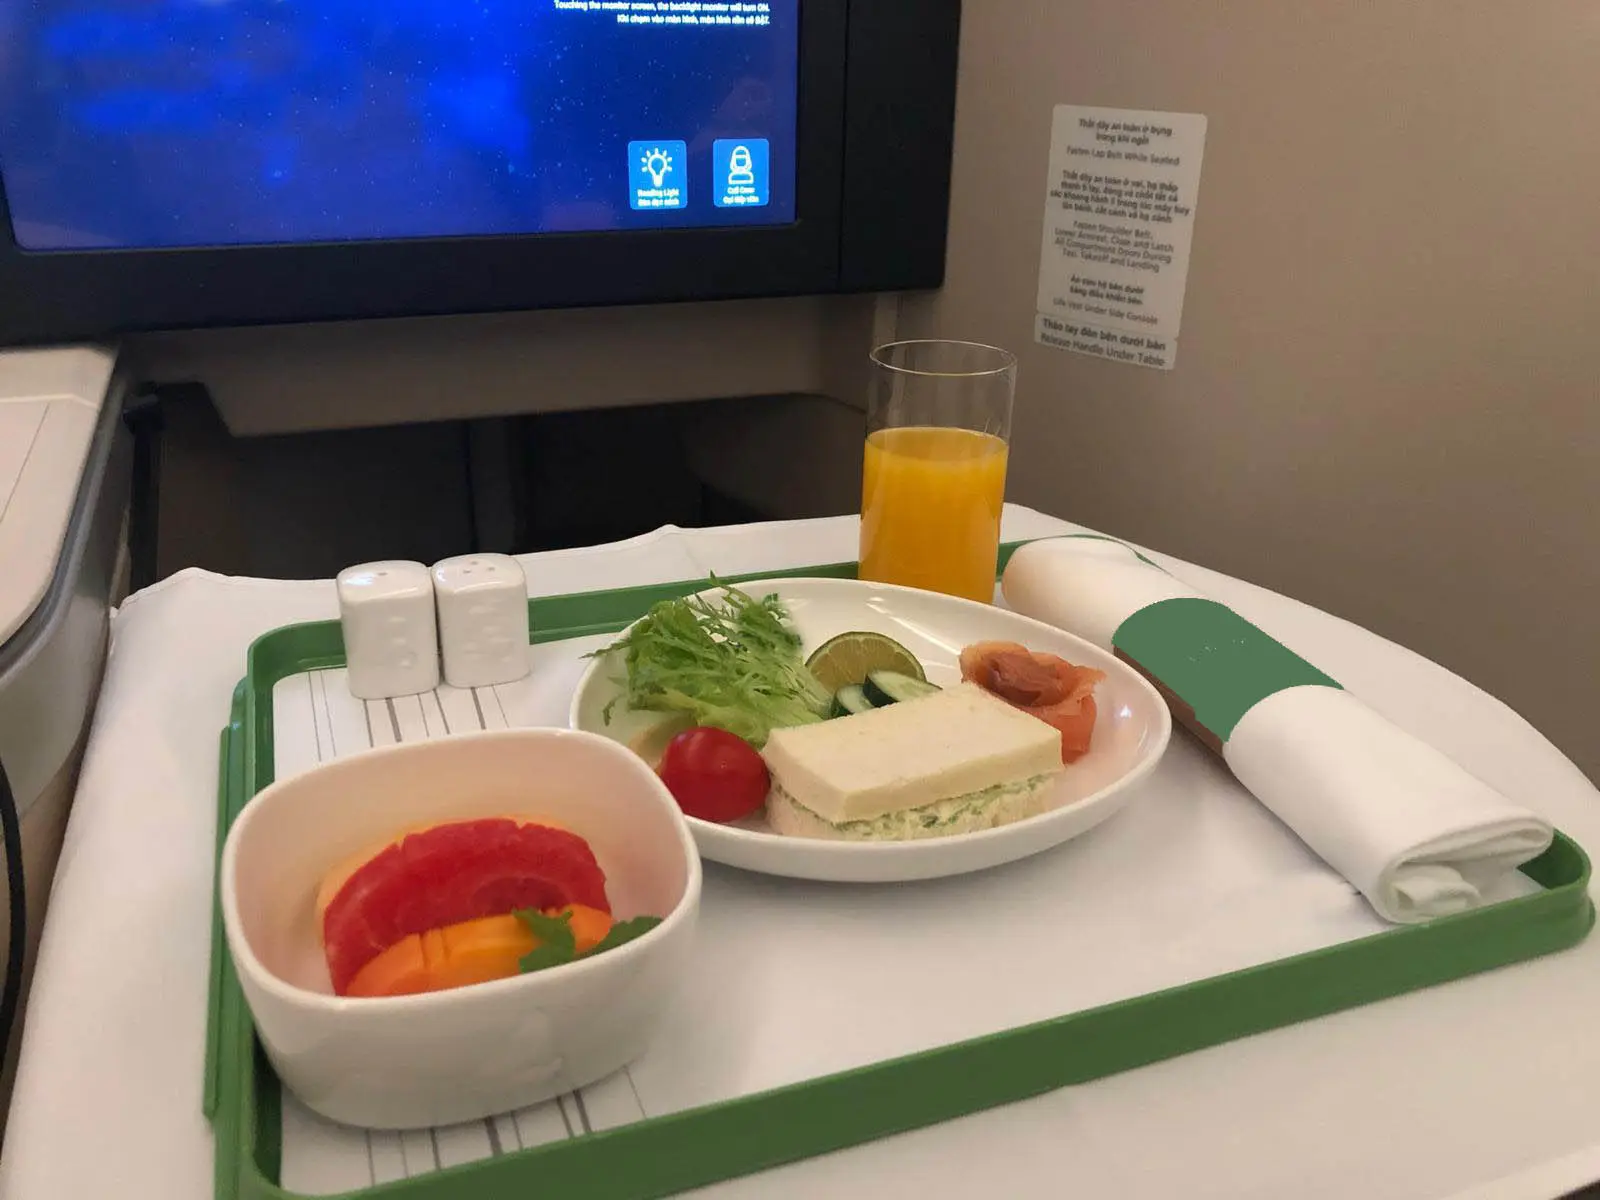 A tray with food and juice on it